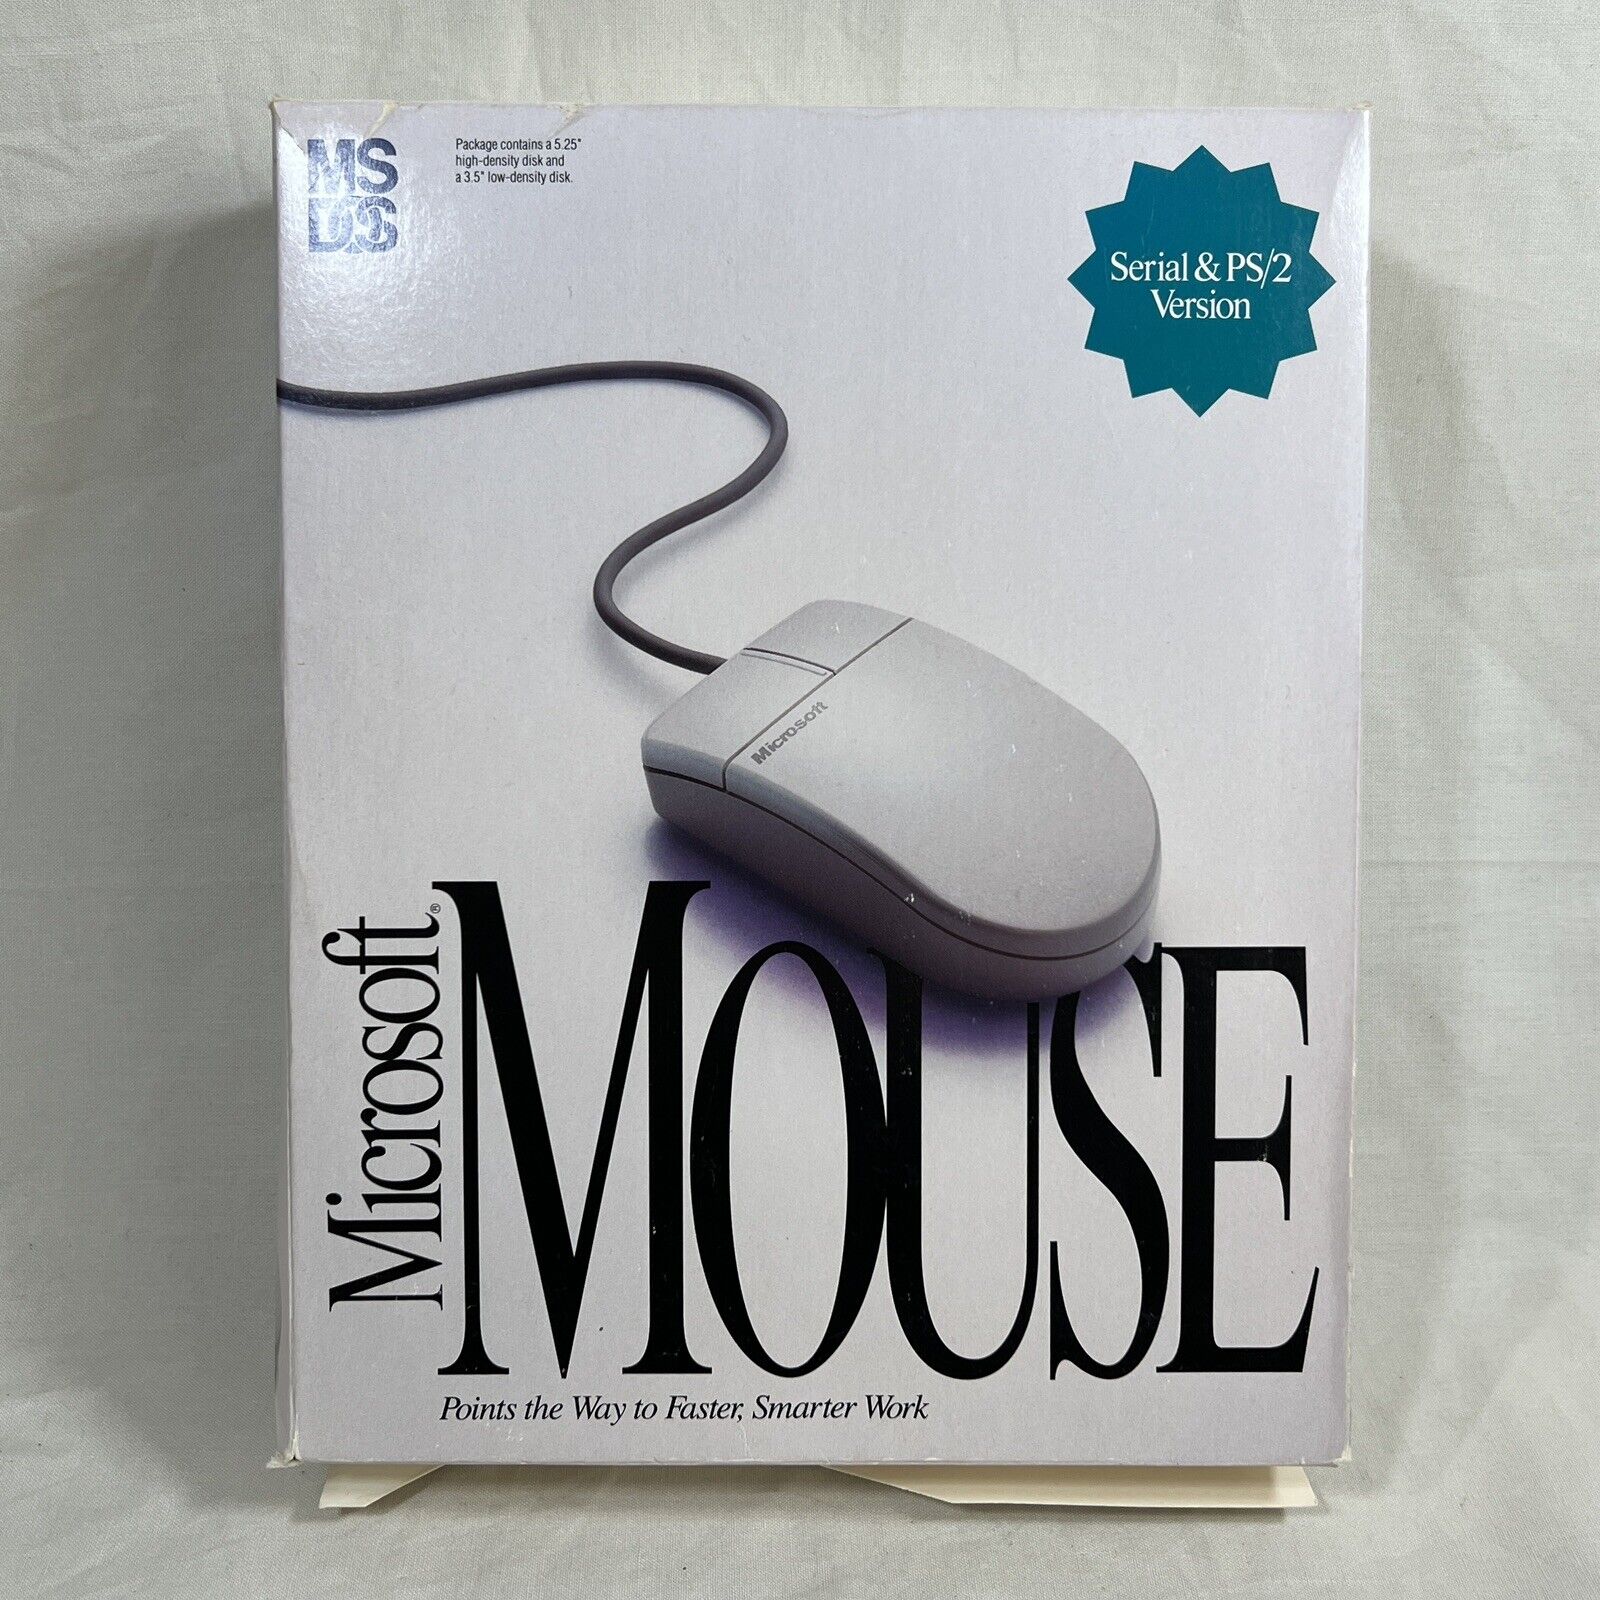 Vintage Microsoft Mouse 2.0 (PS2/Serial Version) with IntelliPoint Software 1990